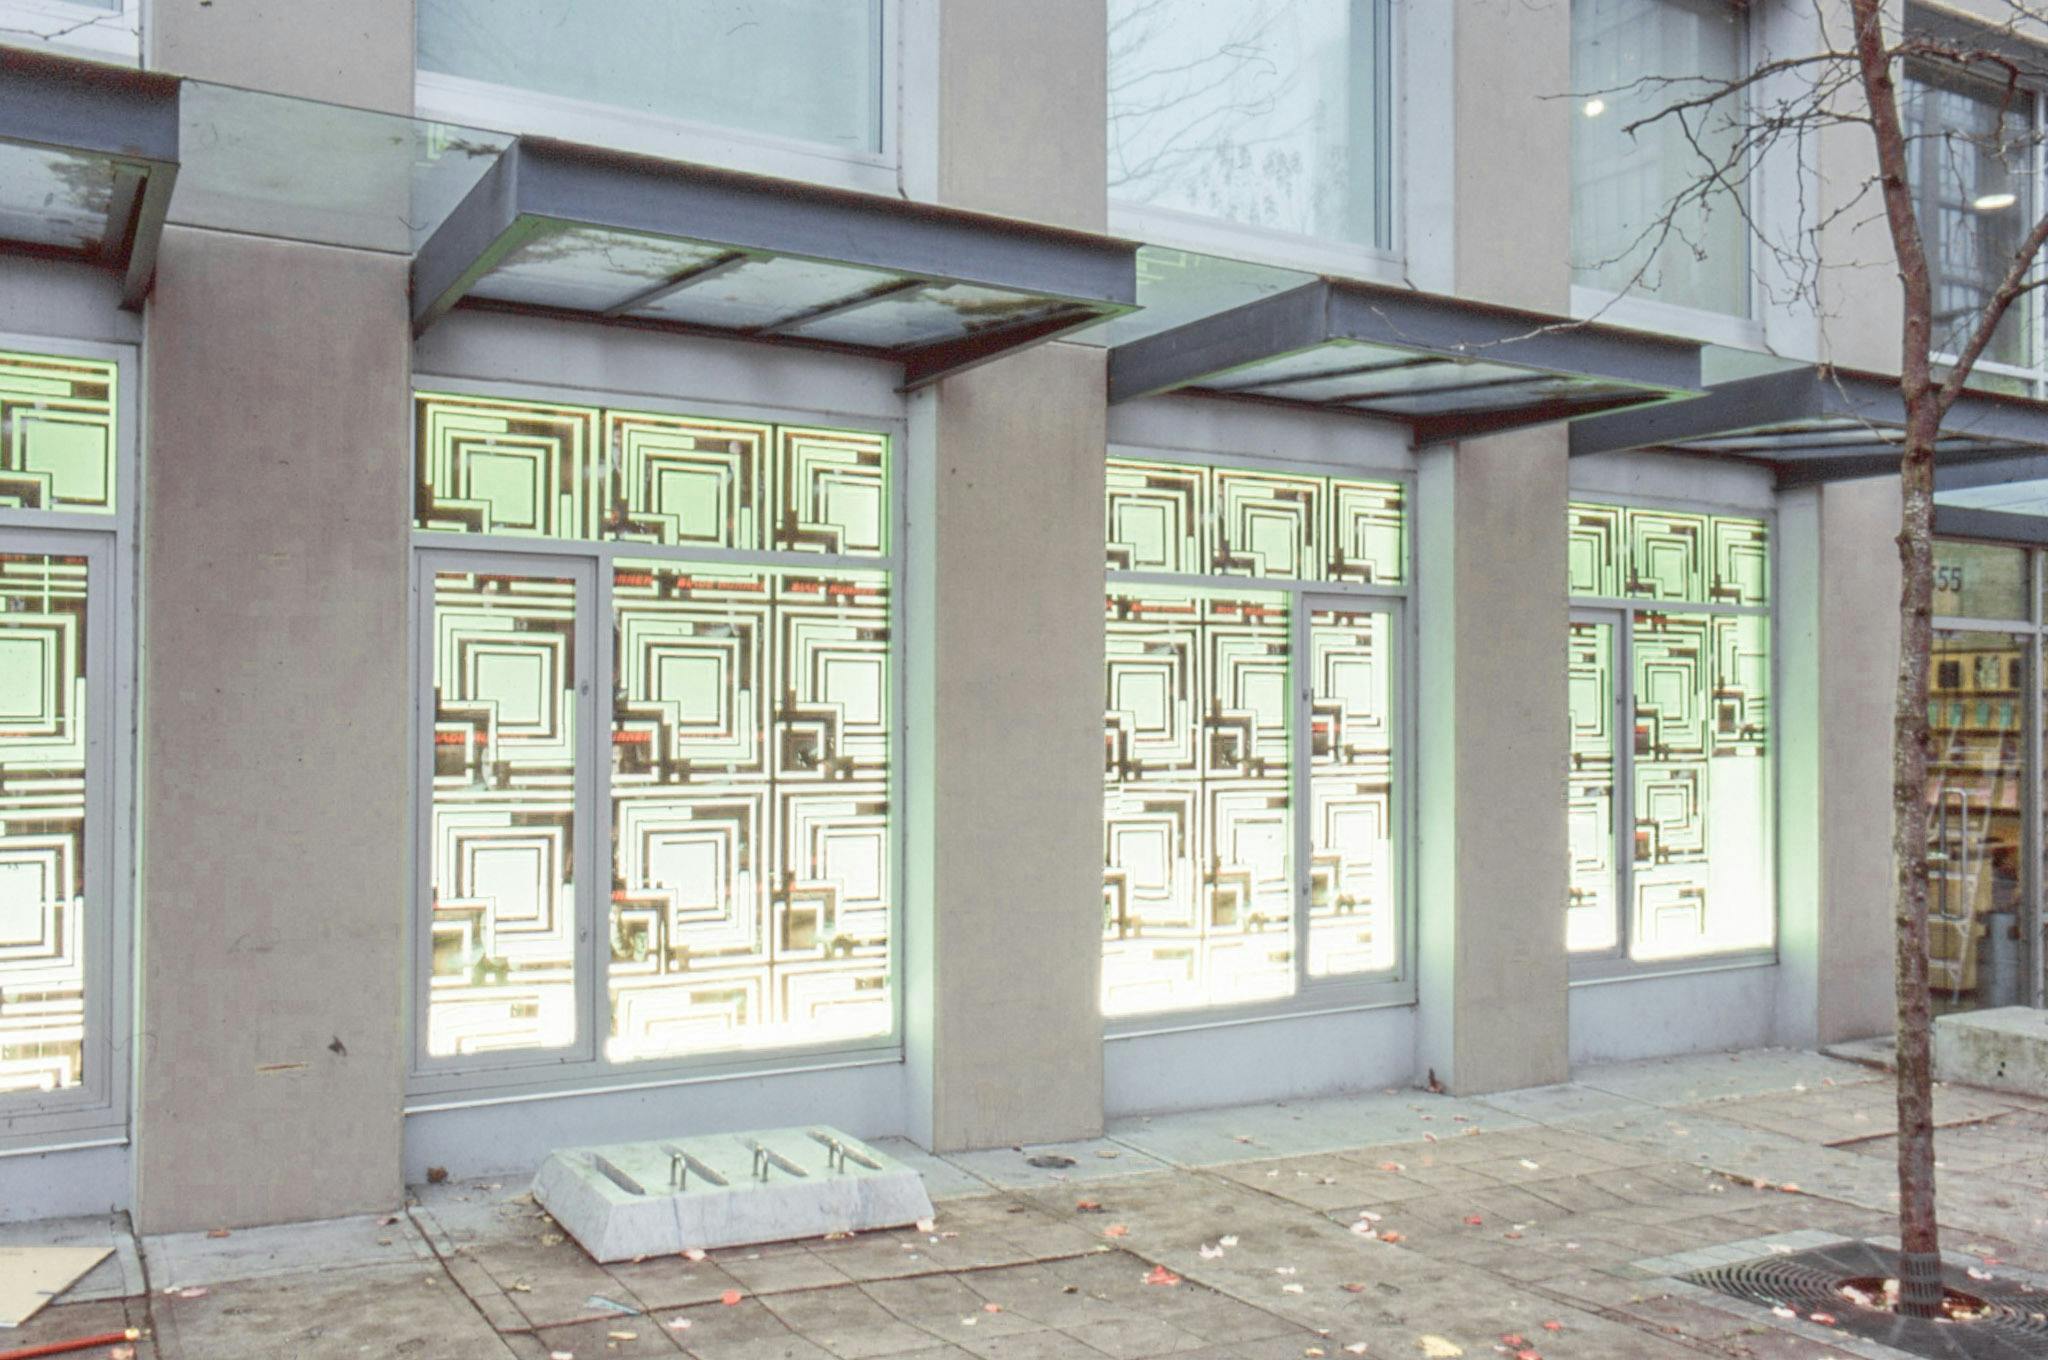 An installation image of artworks in CAG’s window spaces facing a sidewalk. The wall behind glass windows is covered with identically designed posters. The poster’s design is made of a combination of geometric shapes. 